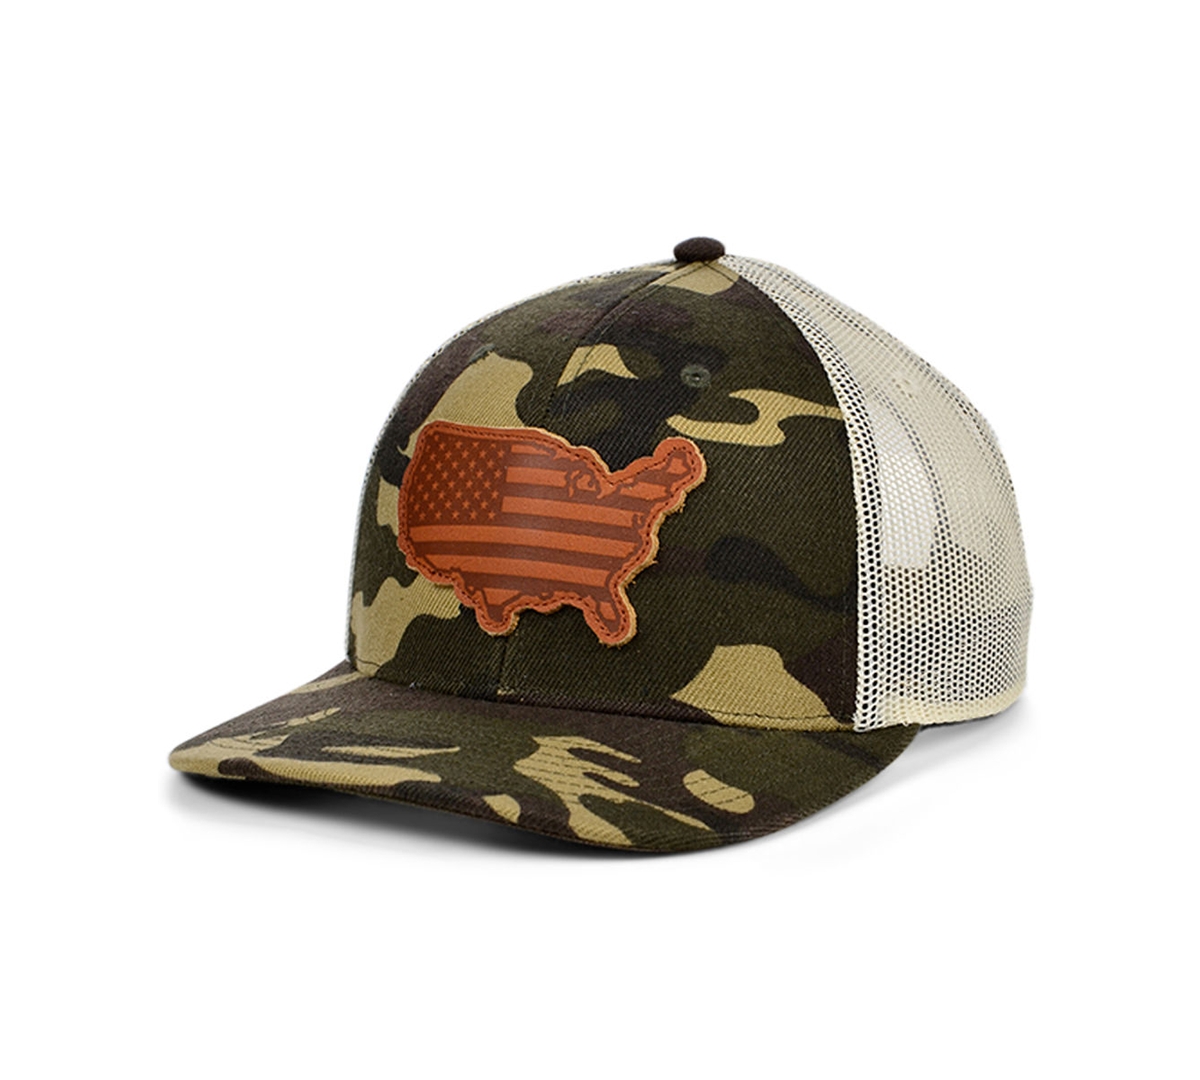 Lids Local Crowns United States Of America Woodland State Patch Curved Trucker Cap In Woodlandcamo,ivory,brown